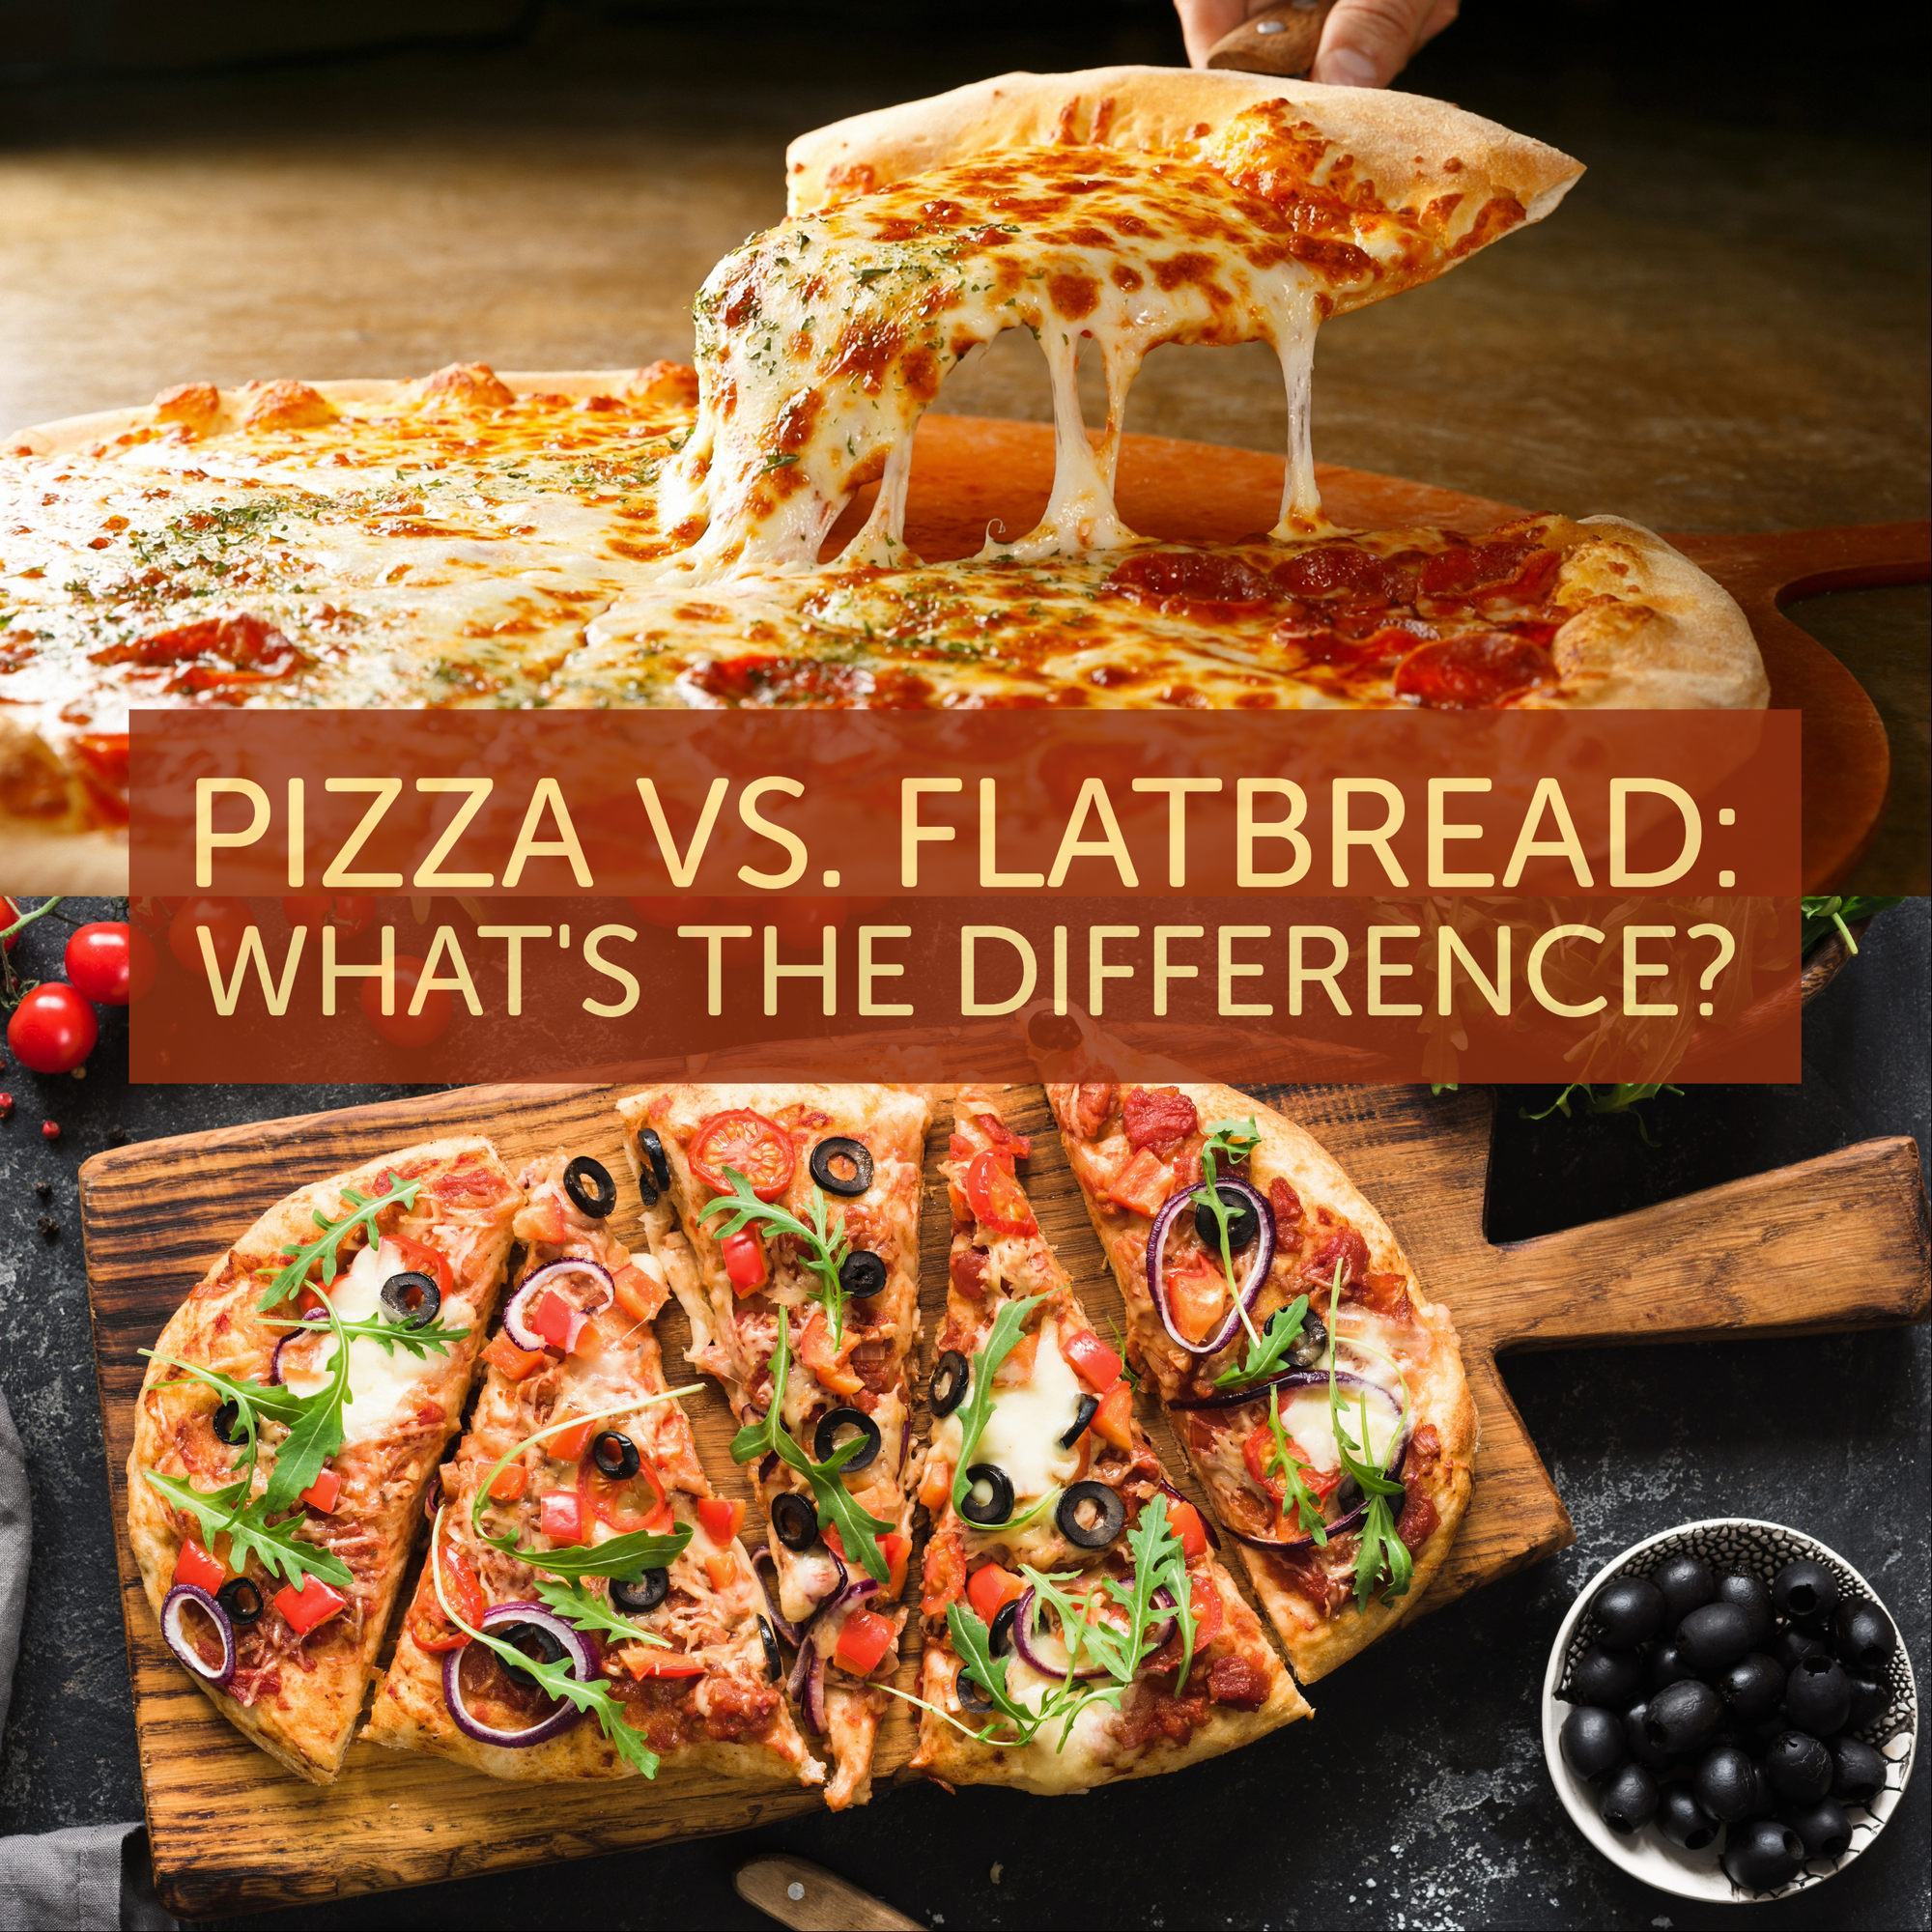 Pizza vs. Flatbread: What's The Difference?